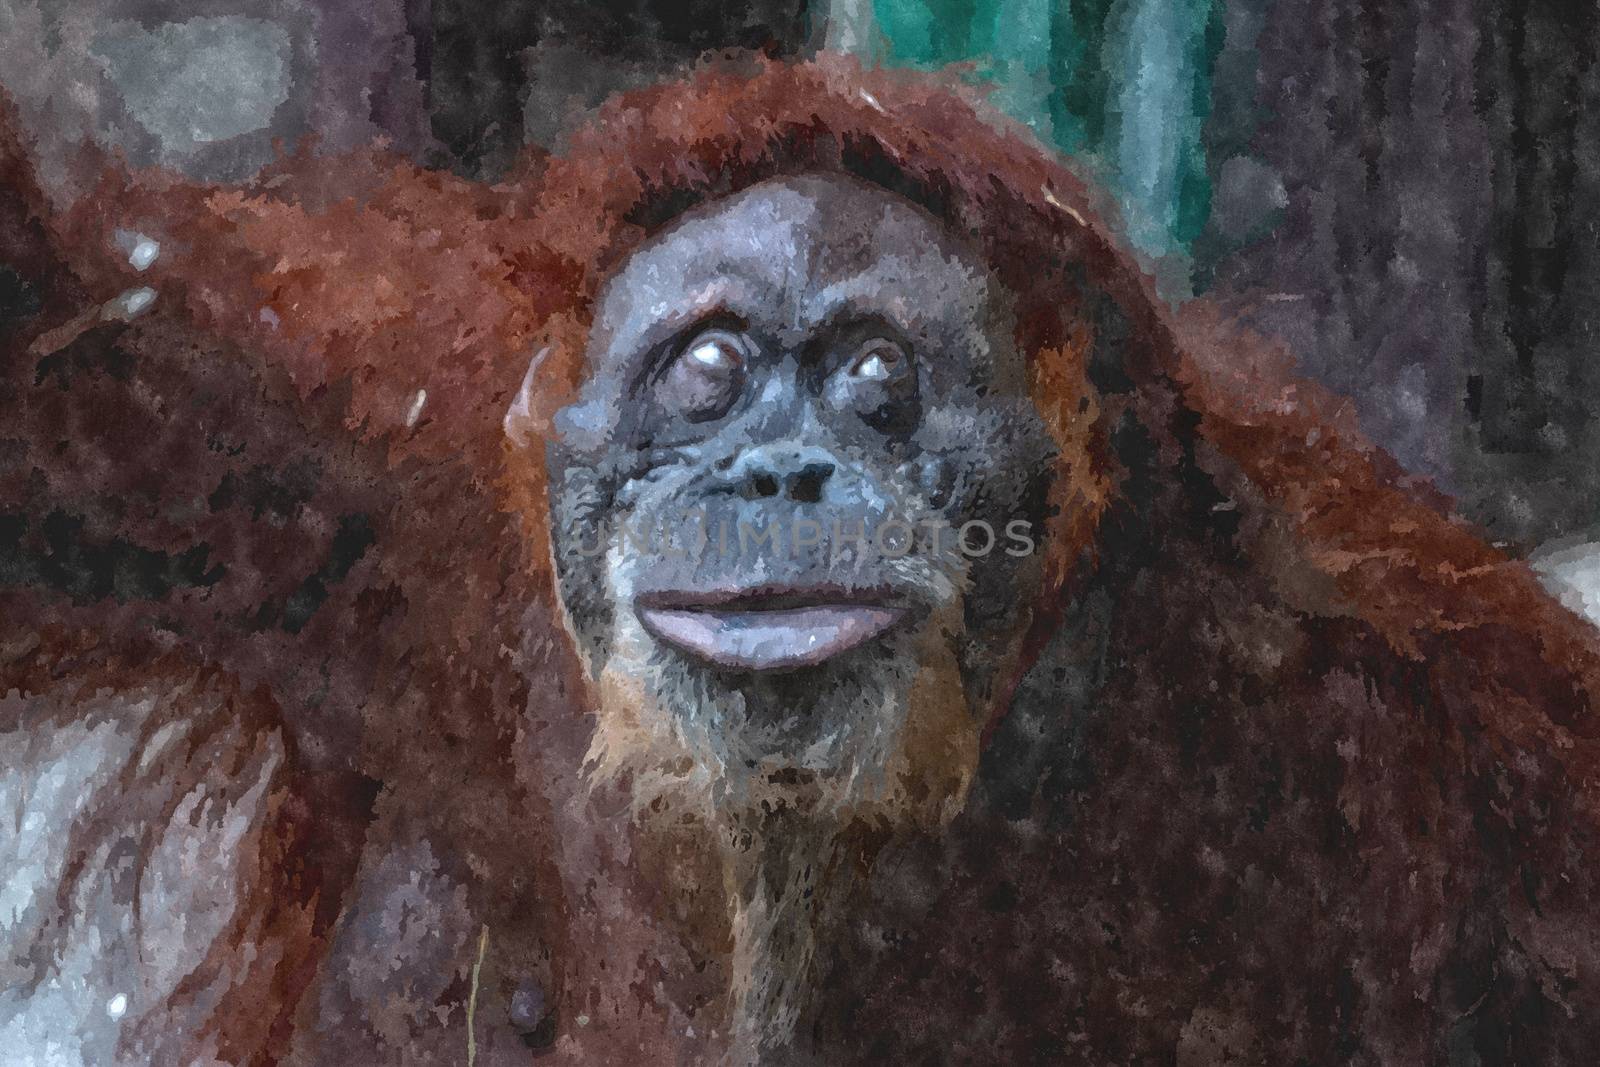 digital water color painting of an orangutan. Critically endangered species